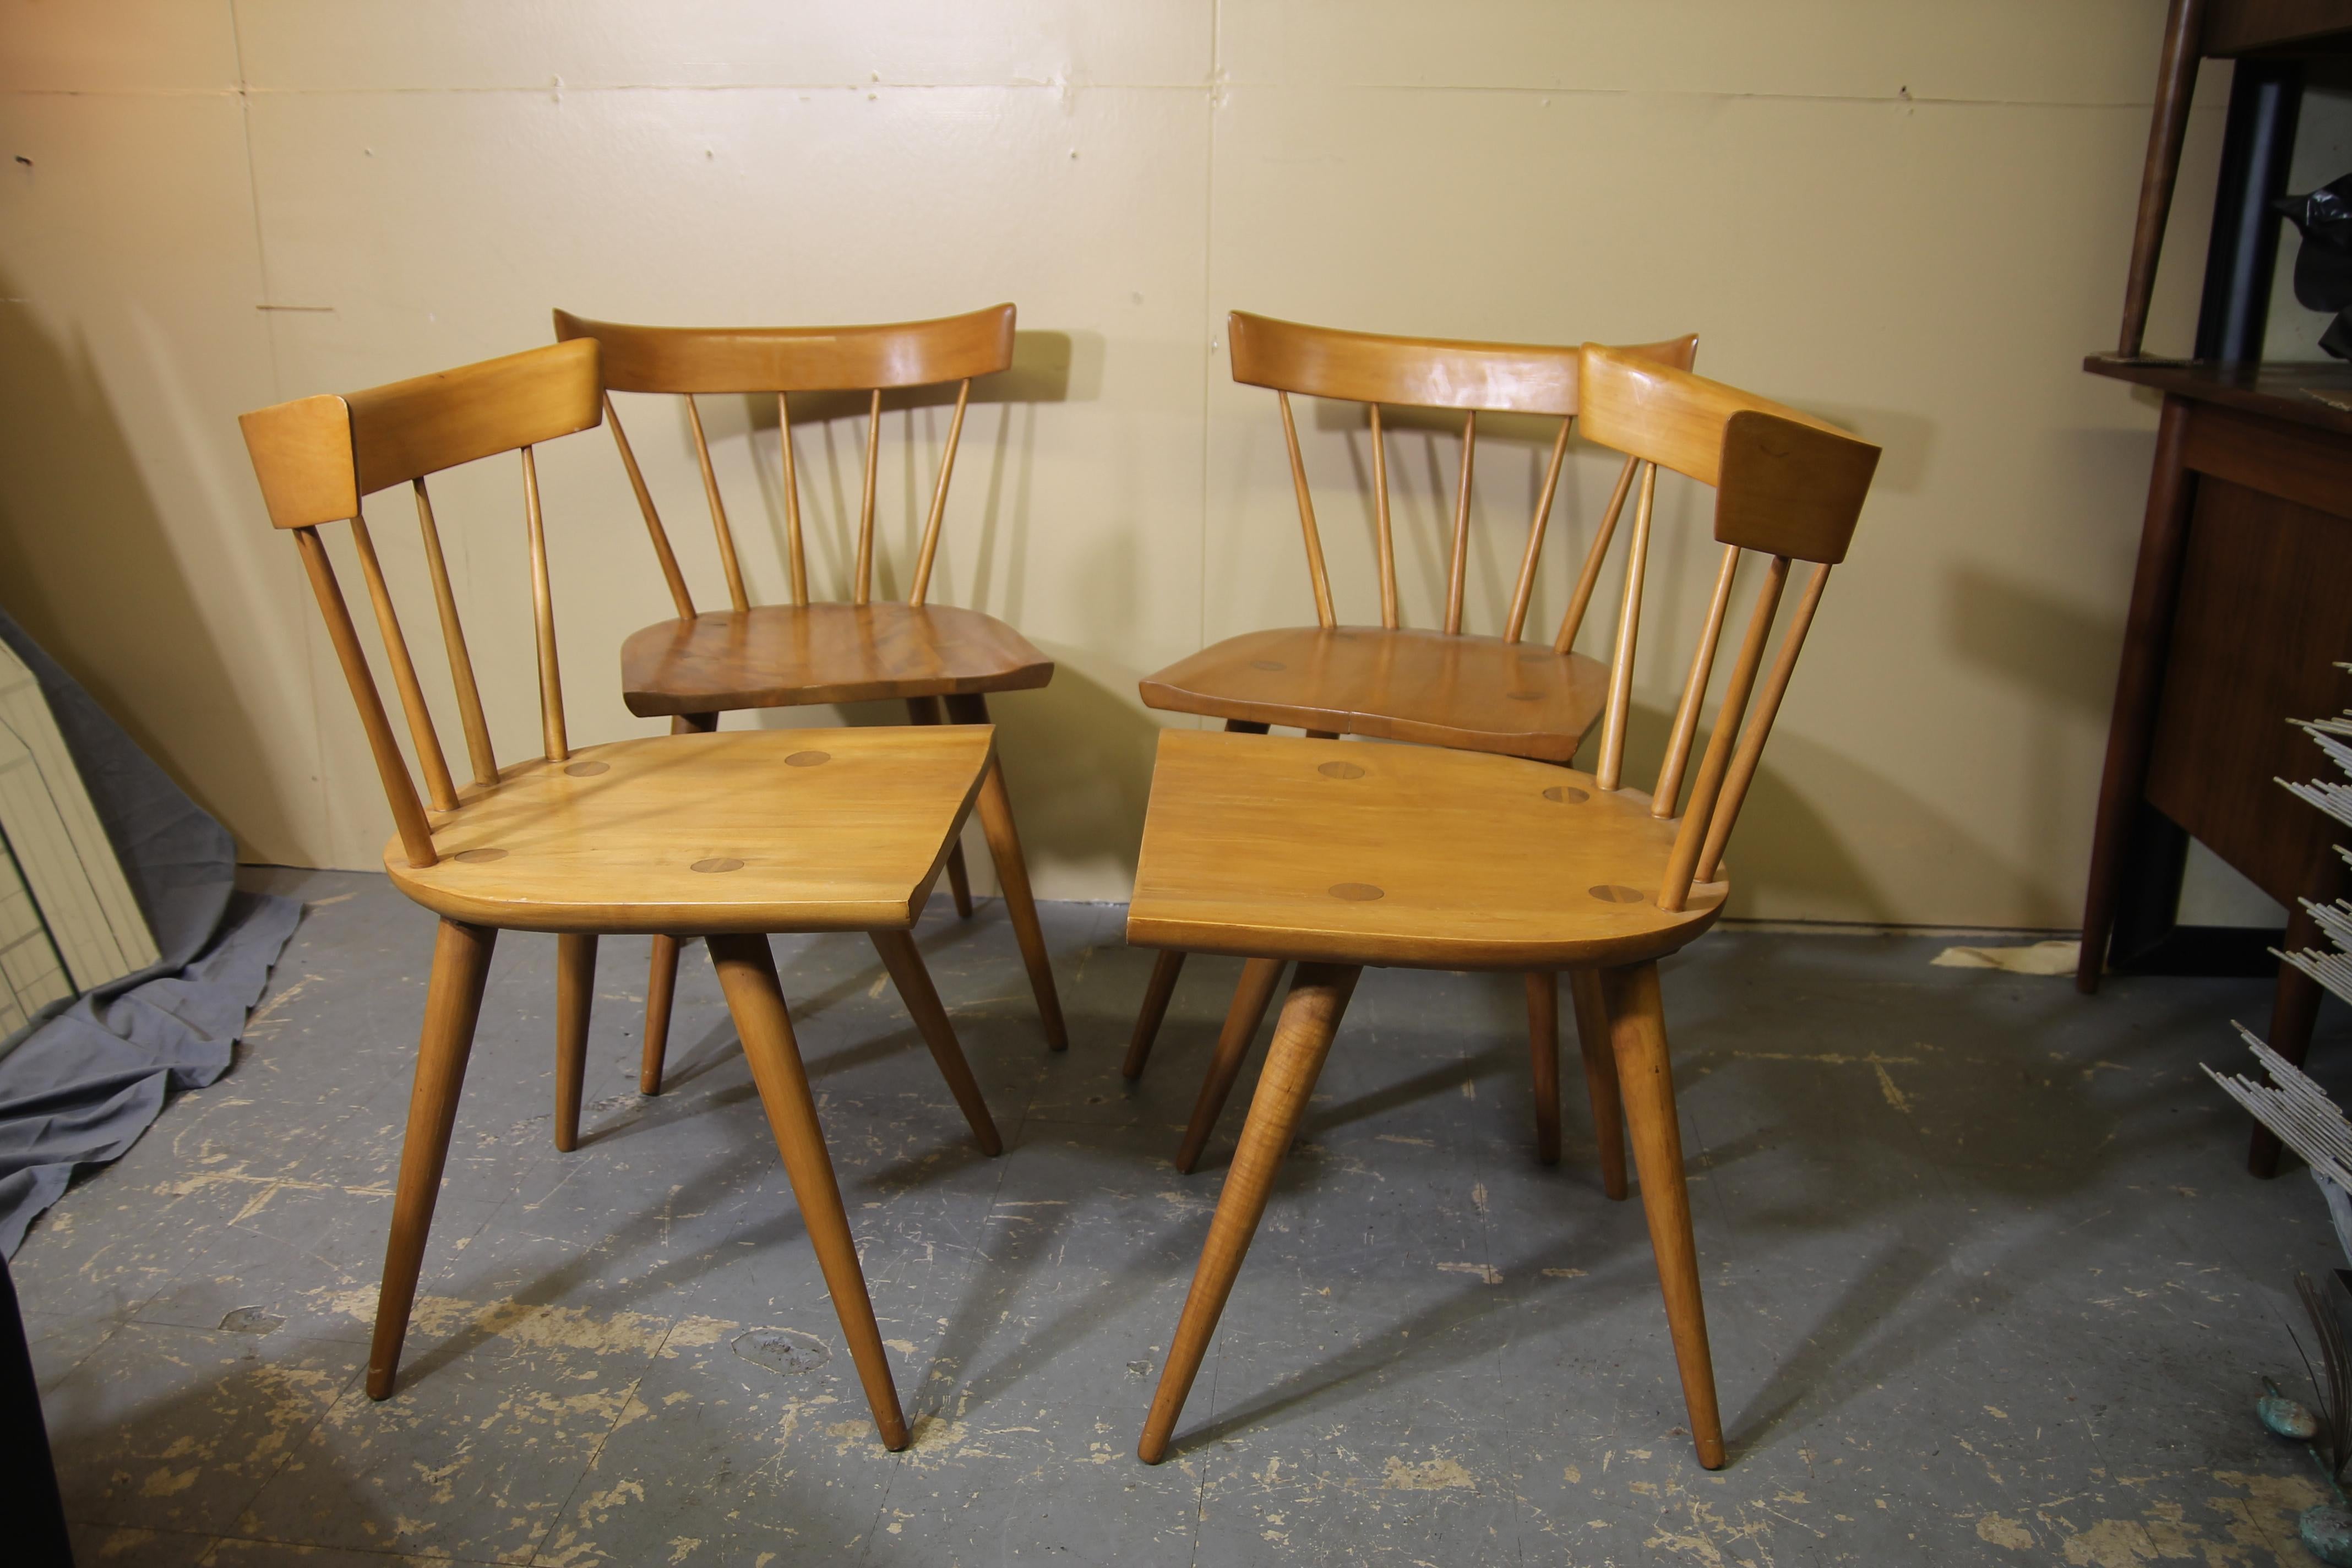 Classic Windsor style chair by Paul McCobb. This is a for a set of 4 solid Mable chairs. This chair was made by Winchendon Furniture in the 1950s.